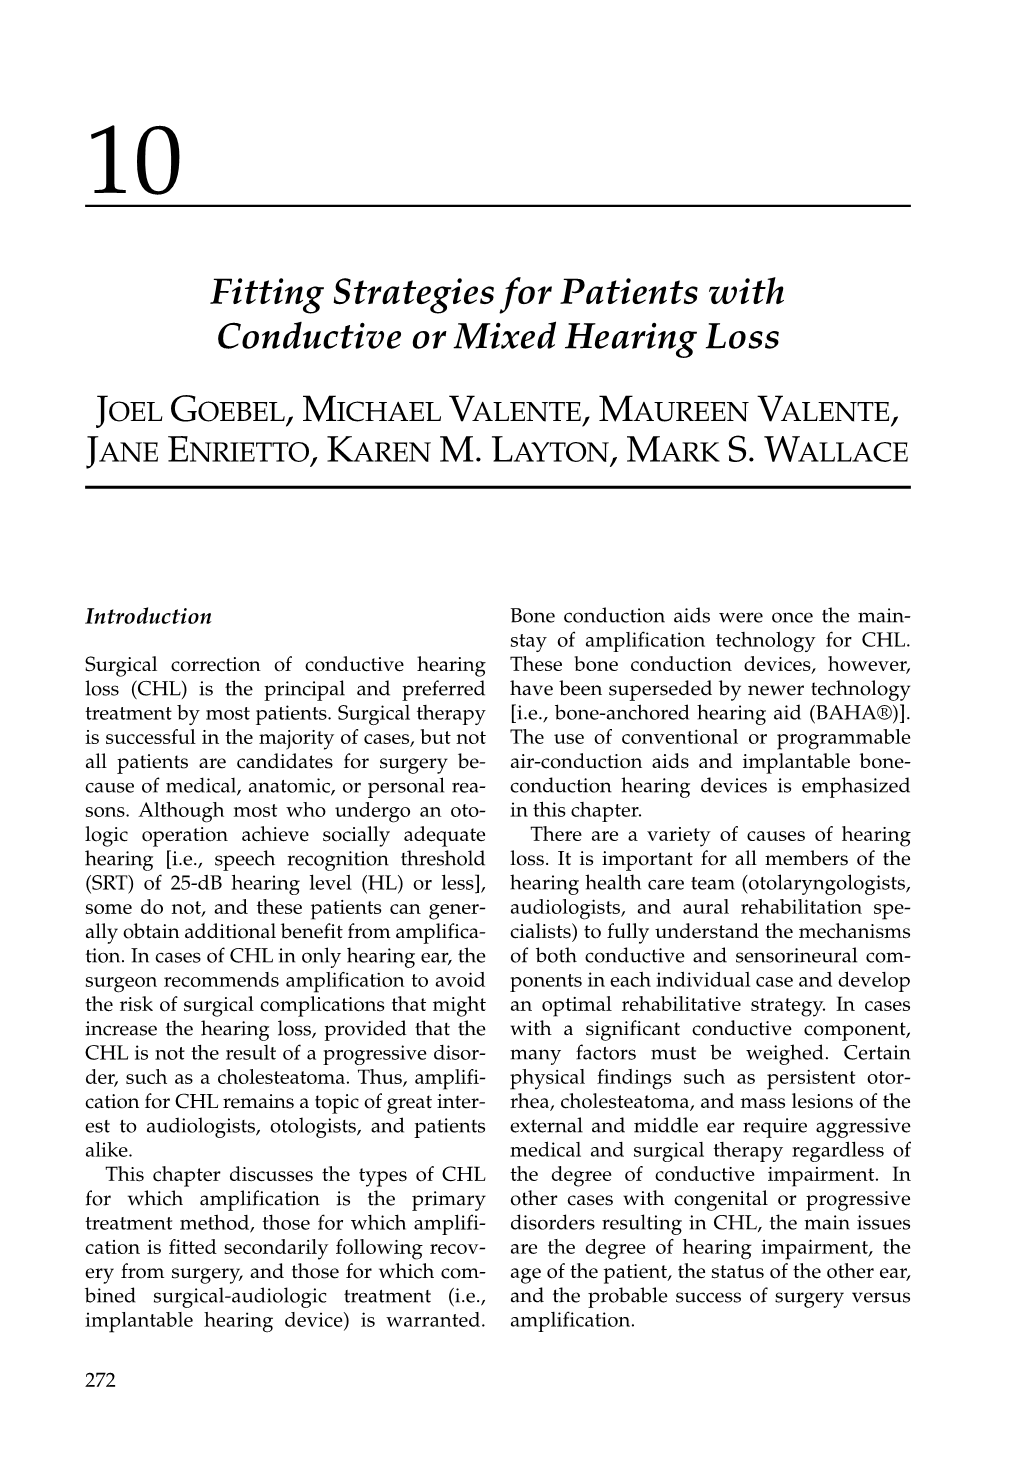 Fitting Strategies for Patients with Conductive Or Mixed Hearing Loss